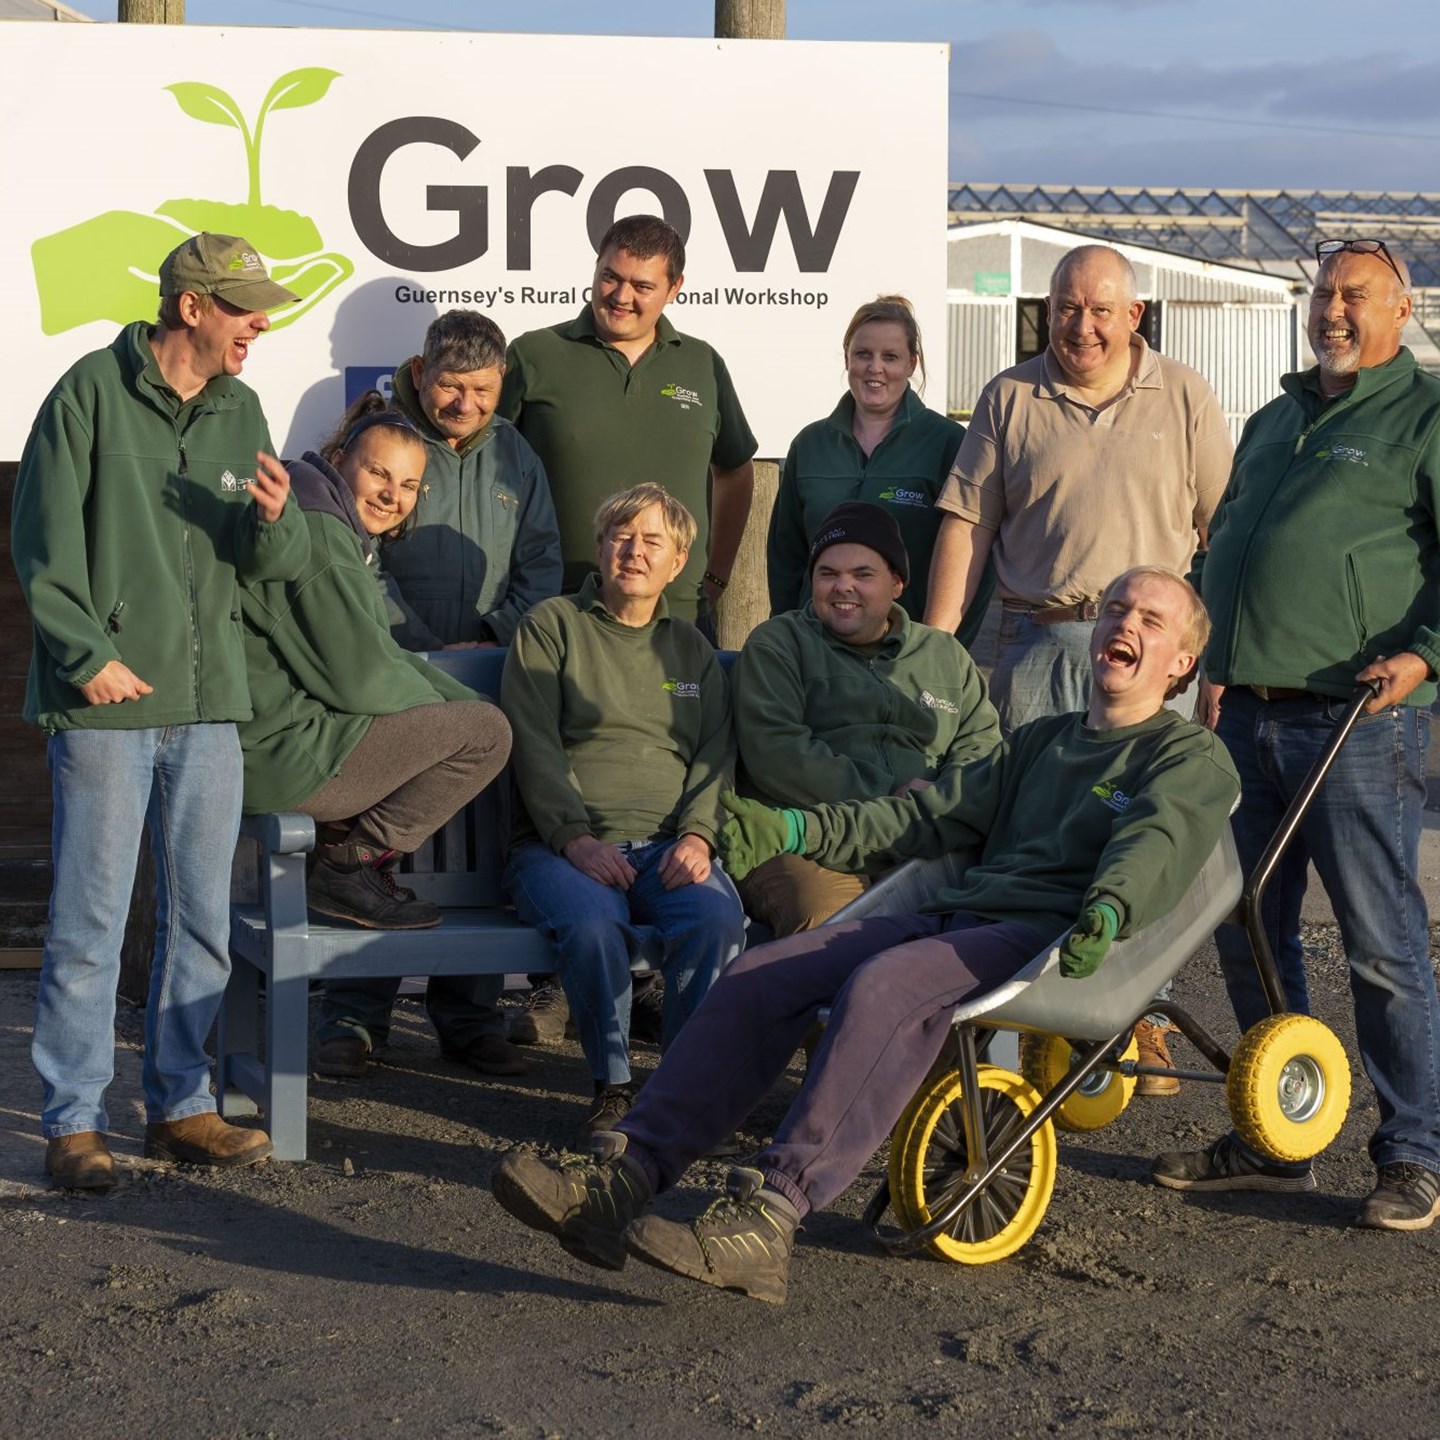 10 volunteers from charity 'Grow' sitting on a bench beside their sign